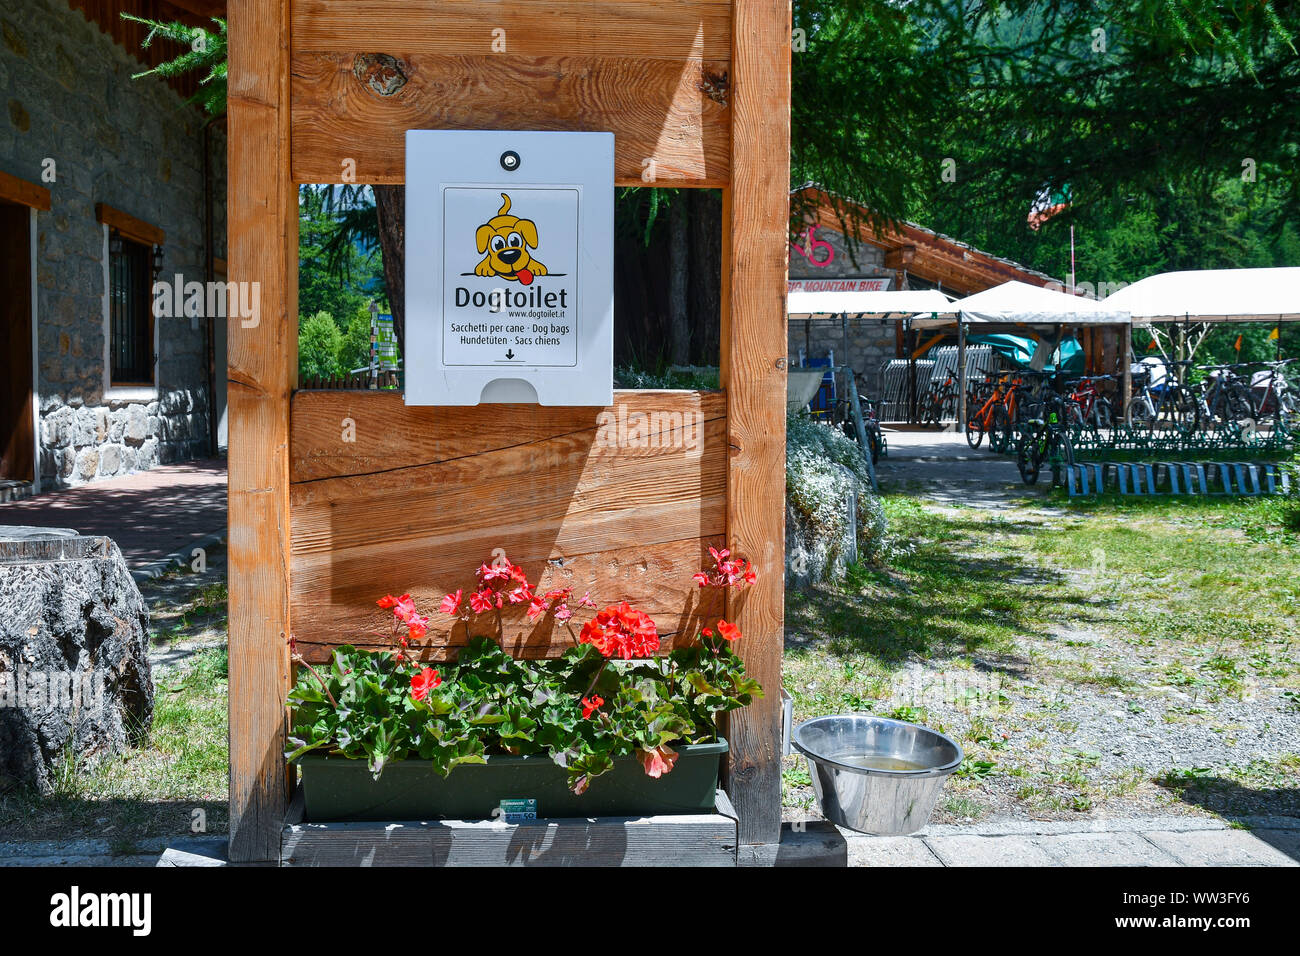 A wooden dog bag dispenser with a water bowl and a flowering plant in a mountain tourist park in summer, Courmayeur, Aosta, Italy Stock Photo